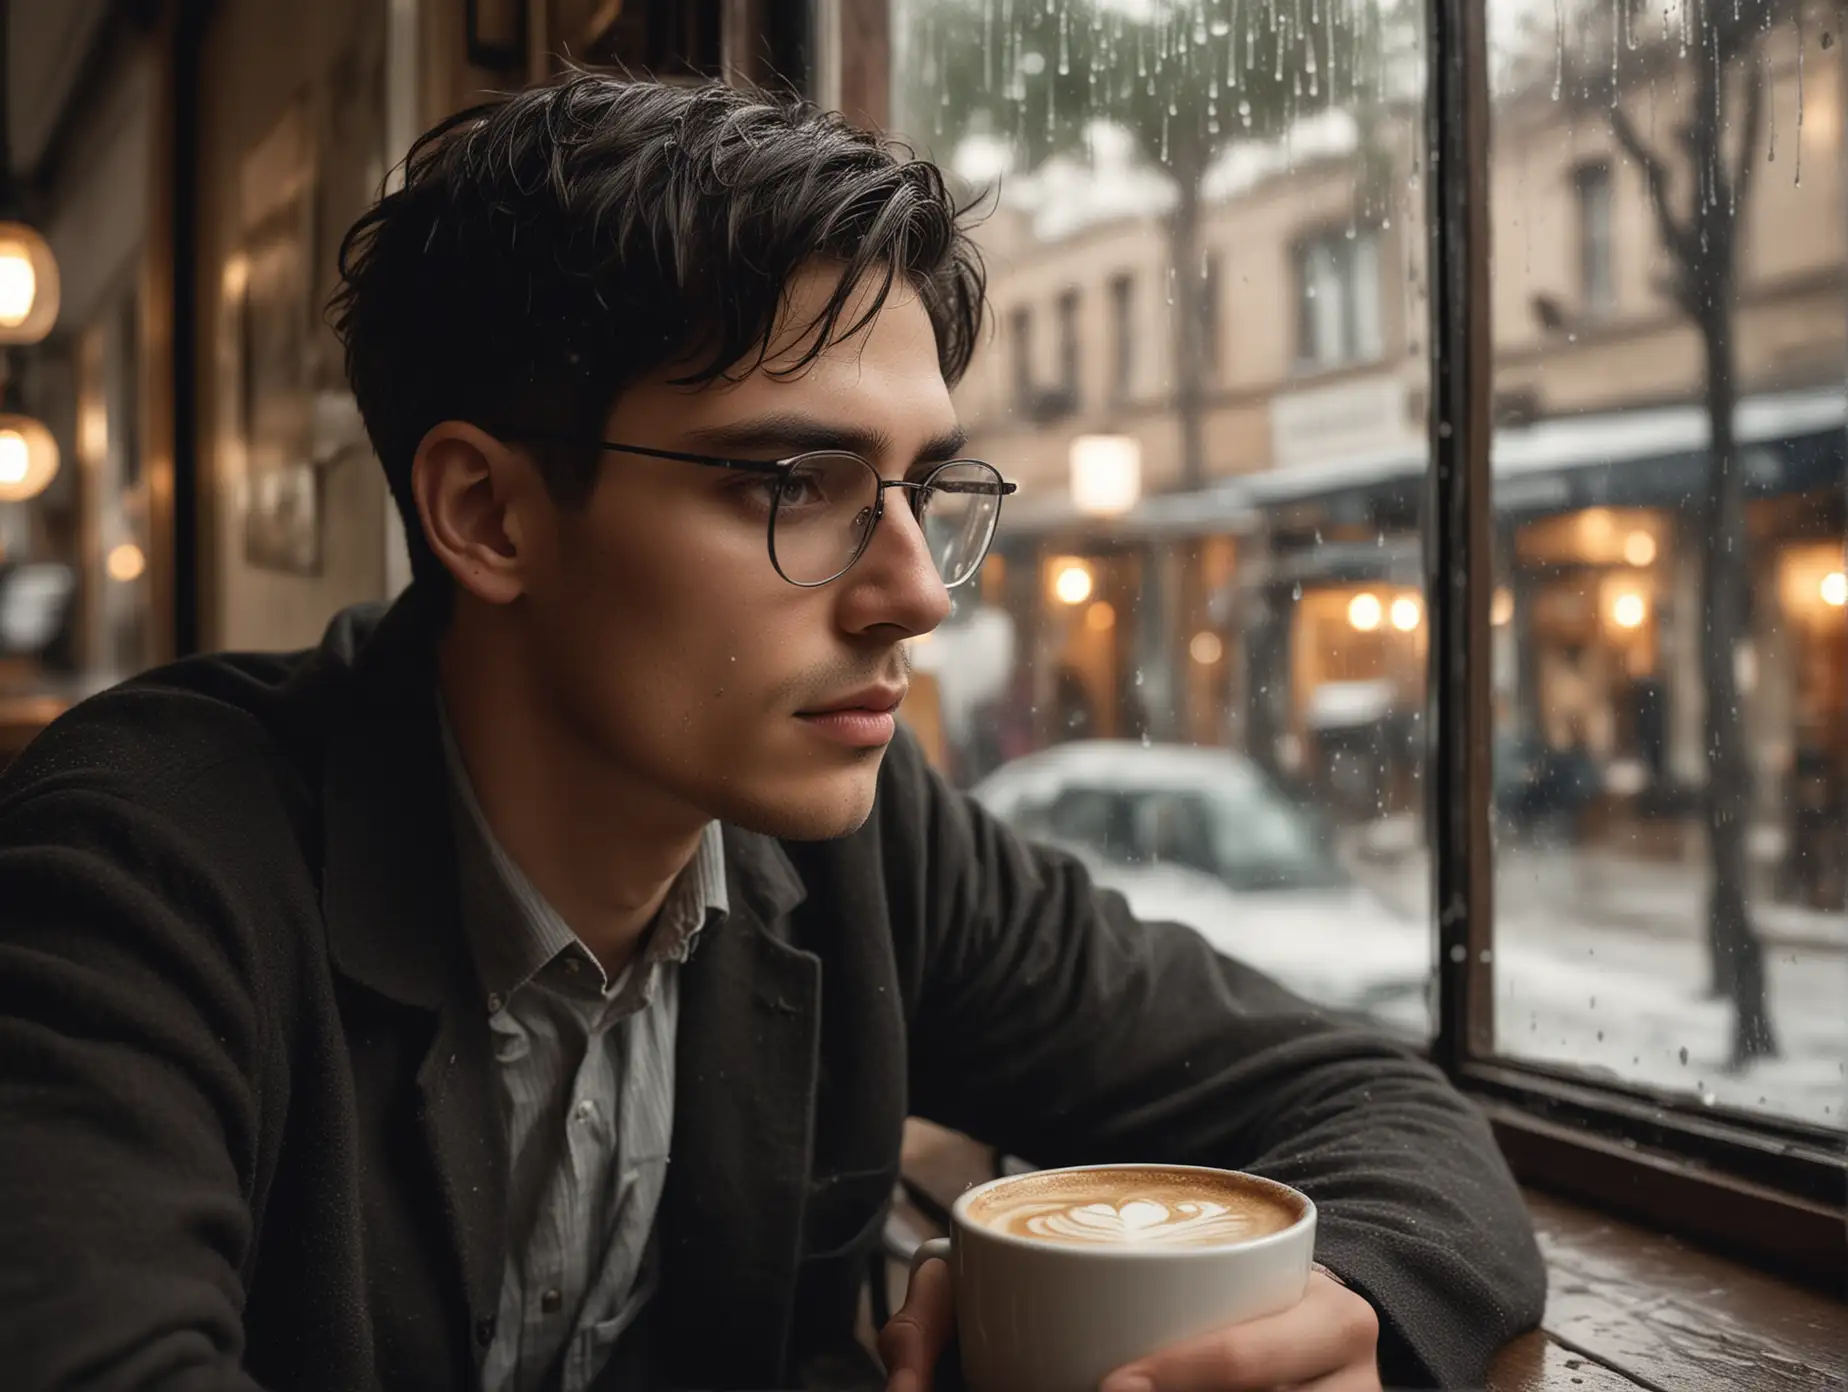 Contemplative-Young-Man-in-Cozy-Cafe-with-Rainy-Window-Backdrop